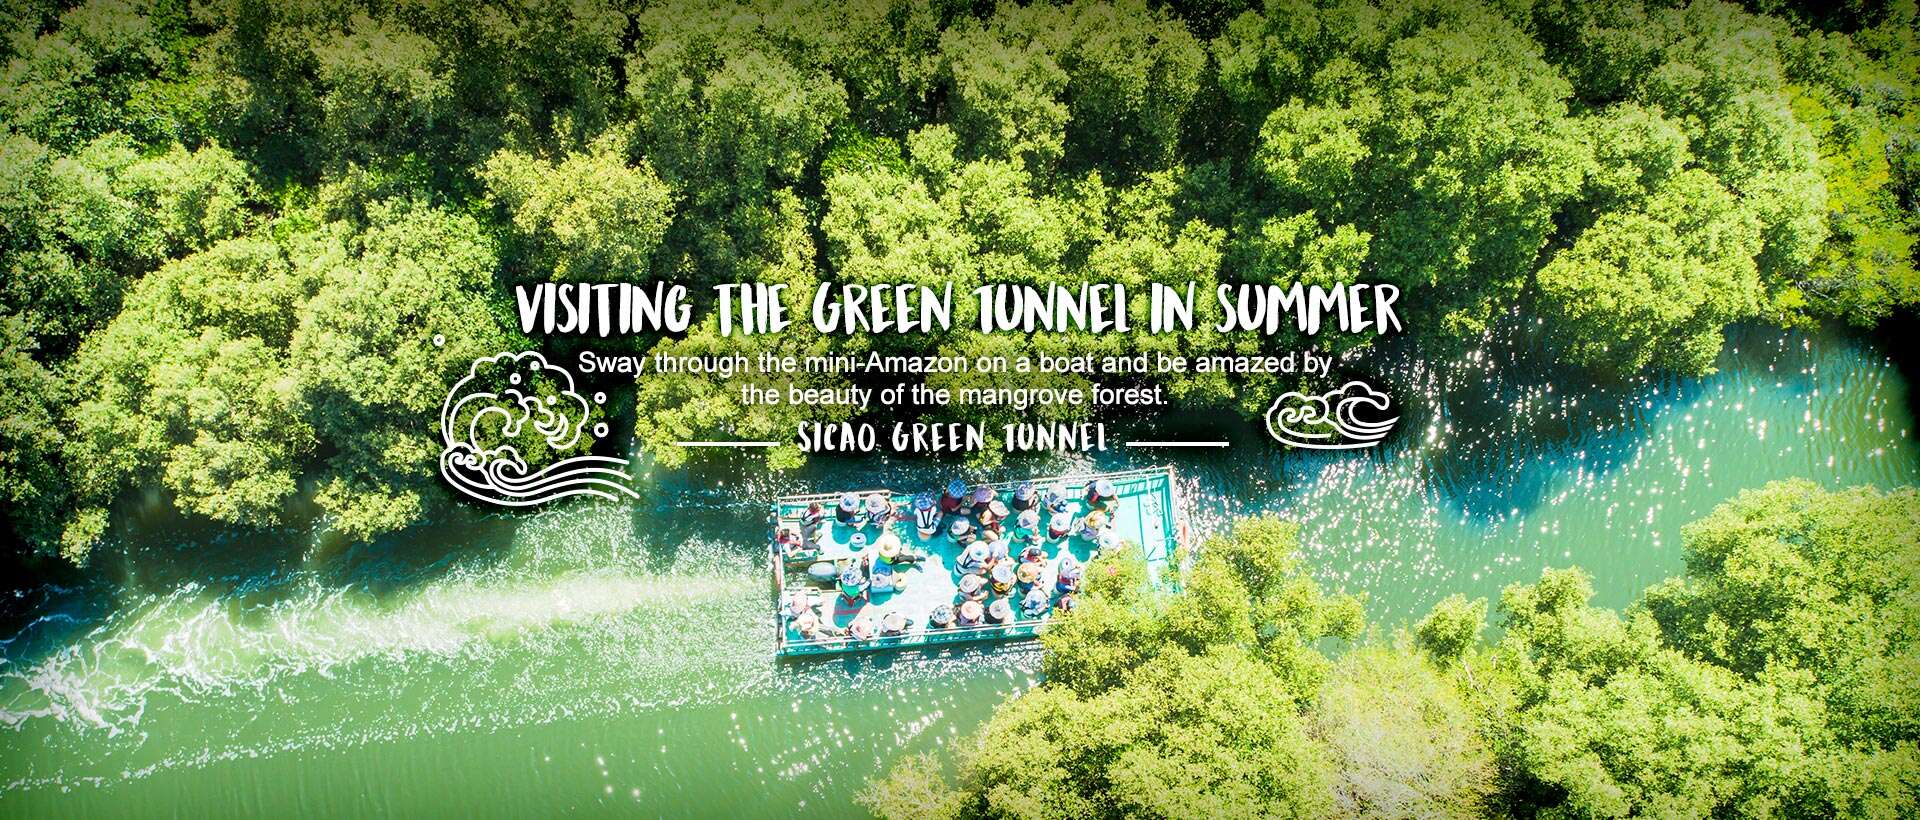 Visiting the Green Tunnel in summer